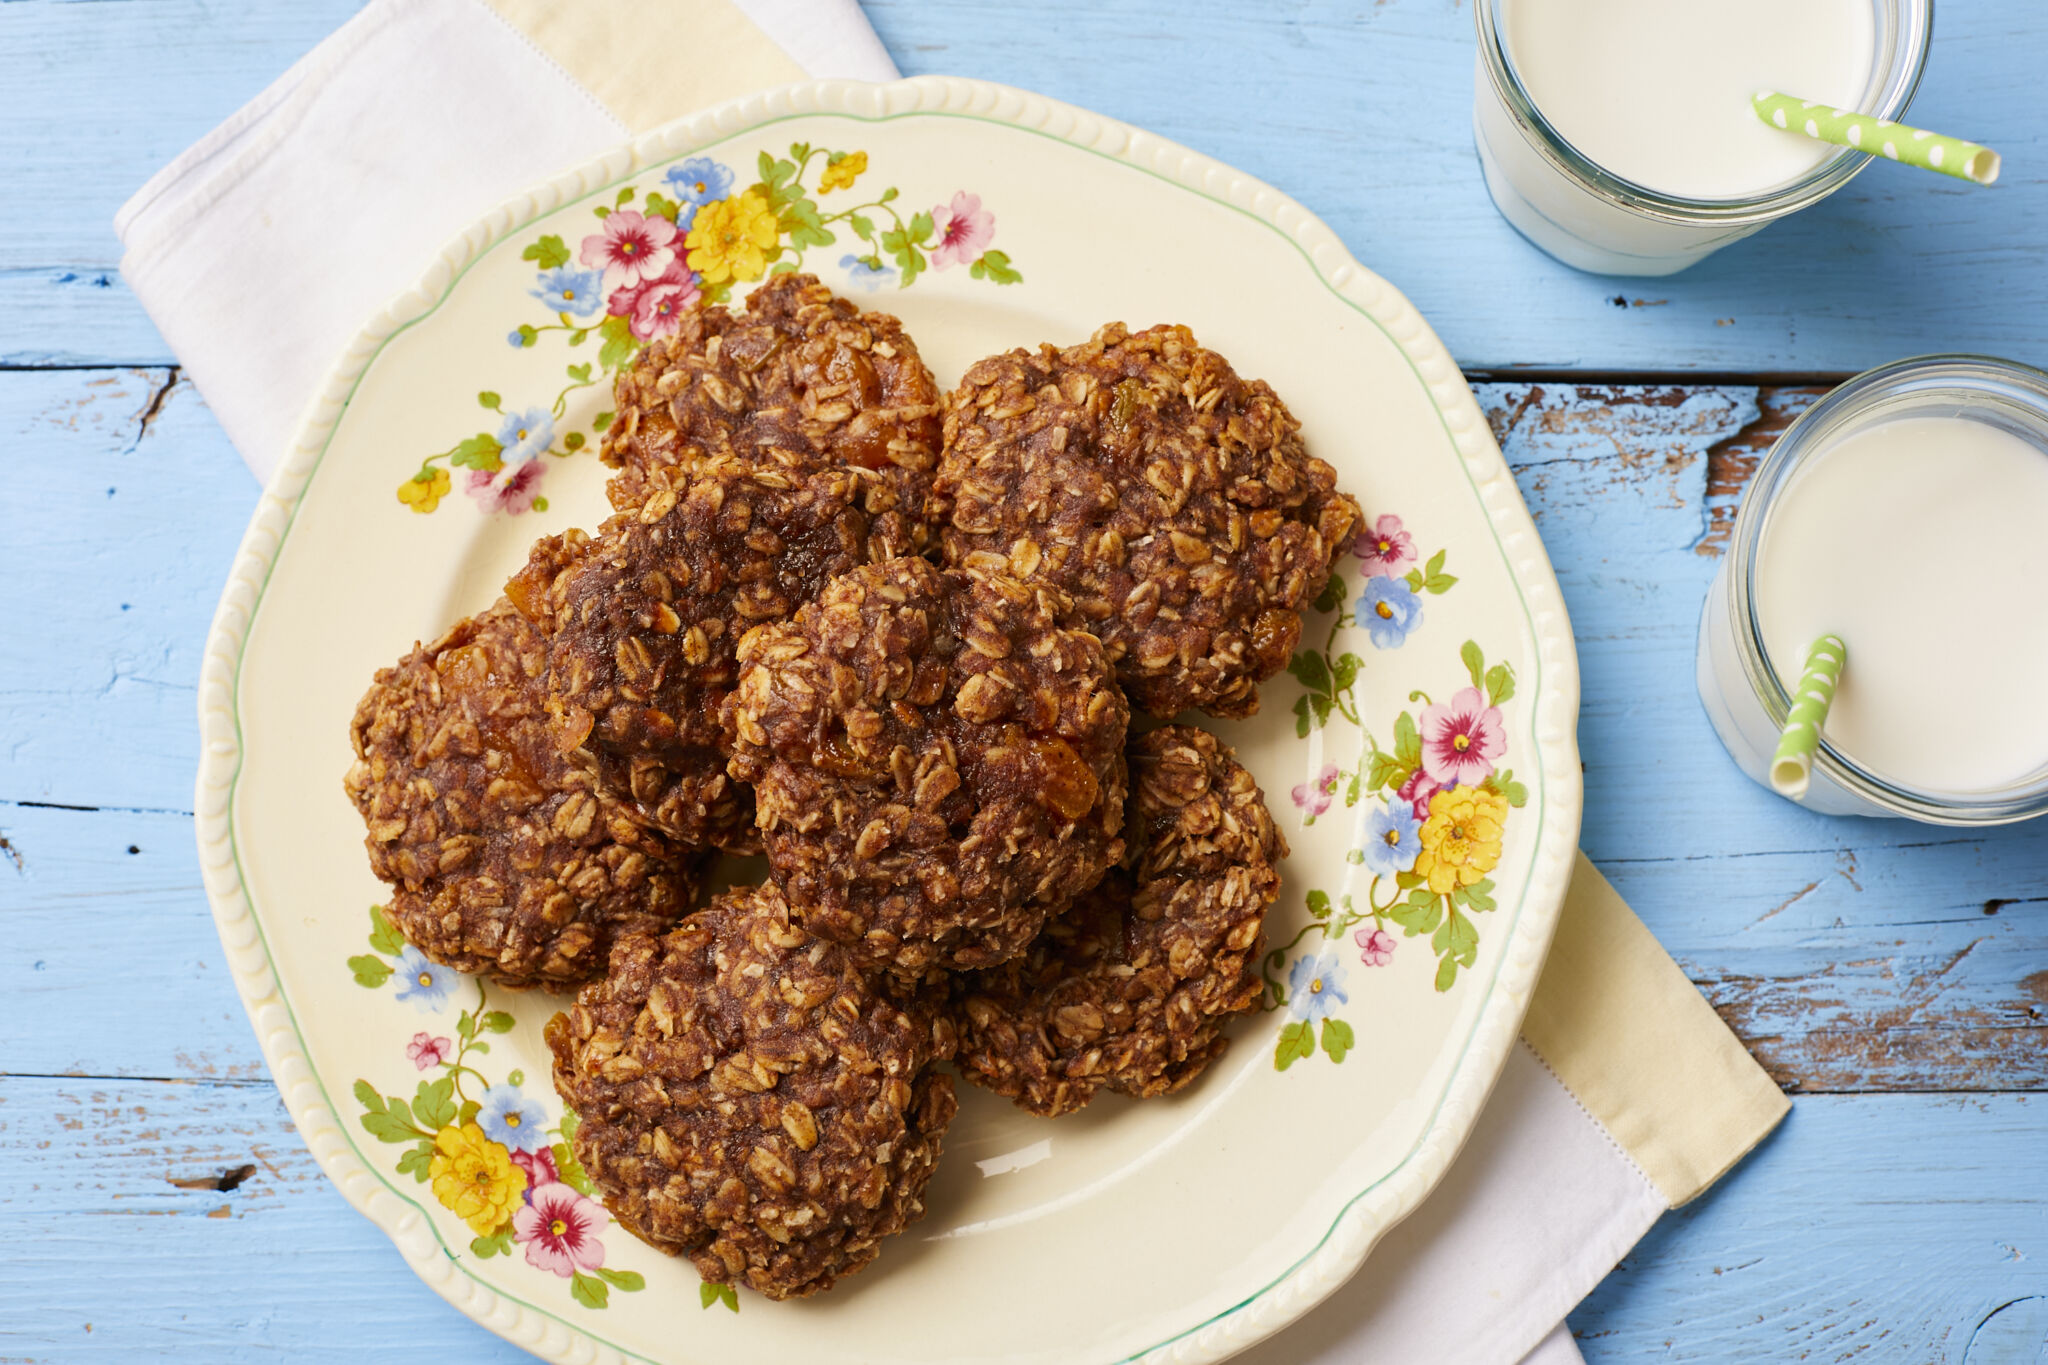 Golden brown breakfast cookies are served on a floral plate with two glasses of milk on the side with straws. Cookies are packed with delicious and nutritious rolled oats, dried fruit and coconut flakes.